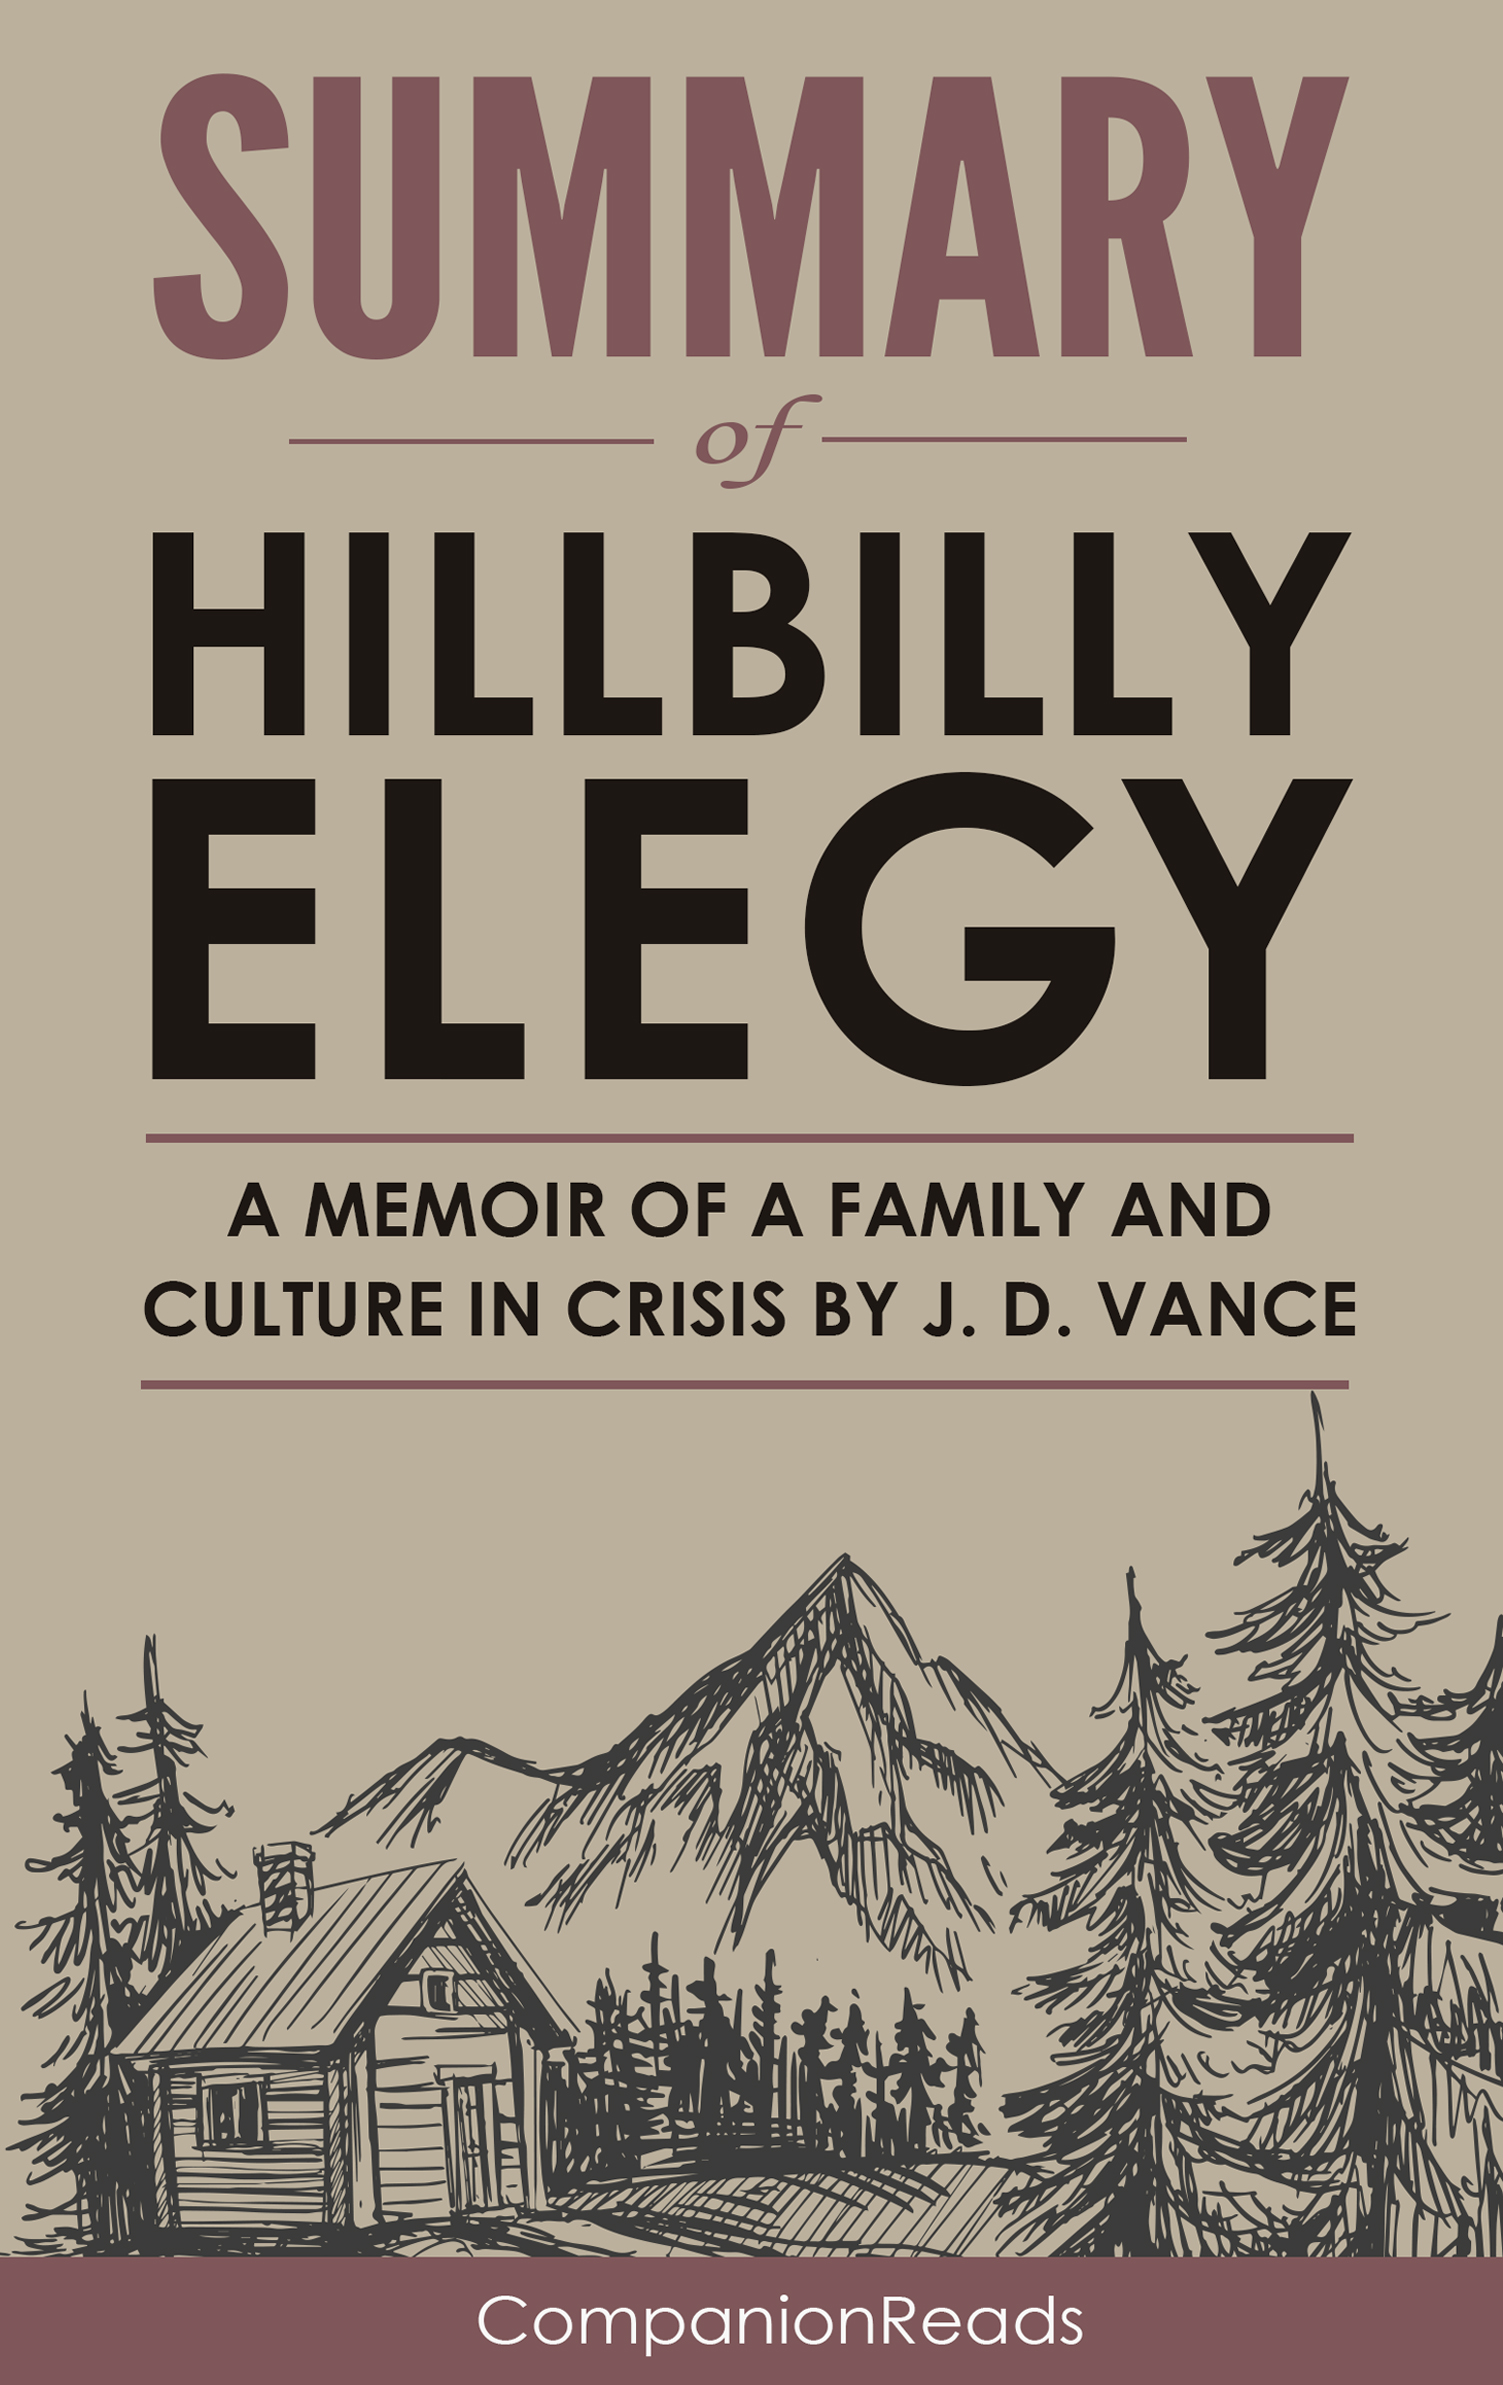 FREE: Summary of Hillbilly Elegy: A Memoir of a Family and Culture in Crisis by J. D. Vance by CompanionReads Summary